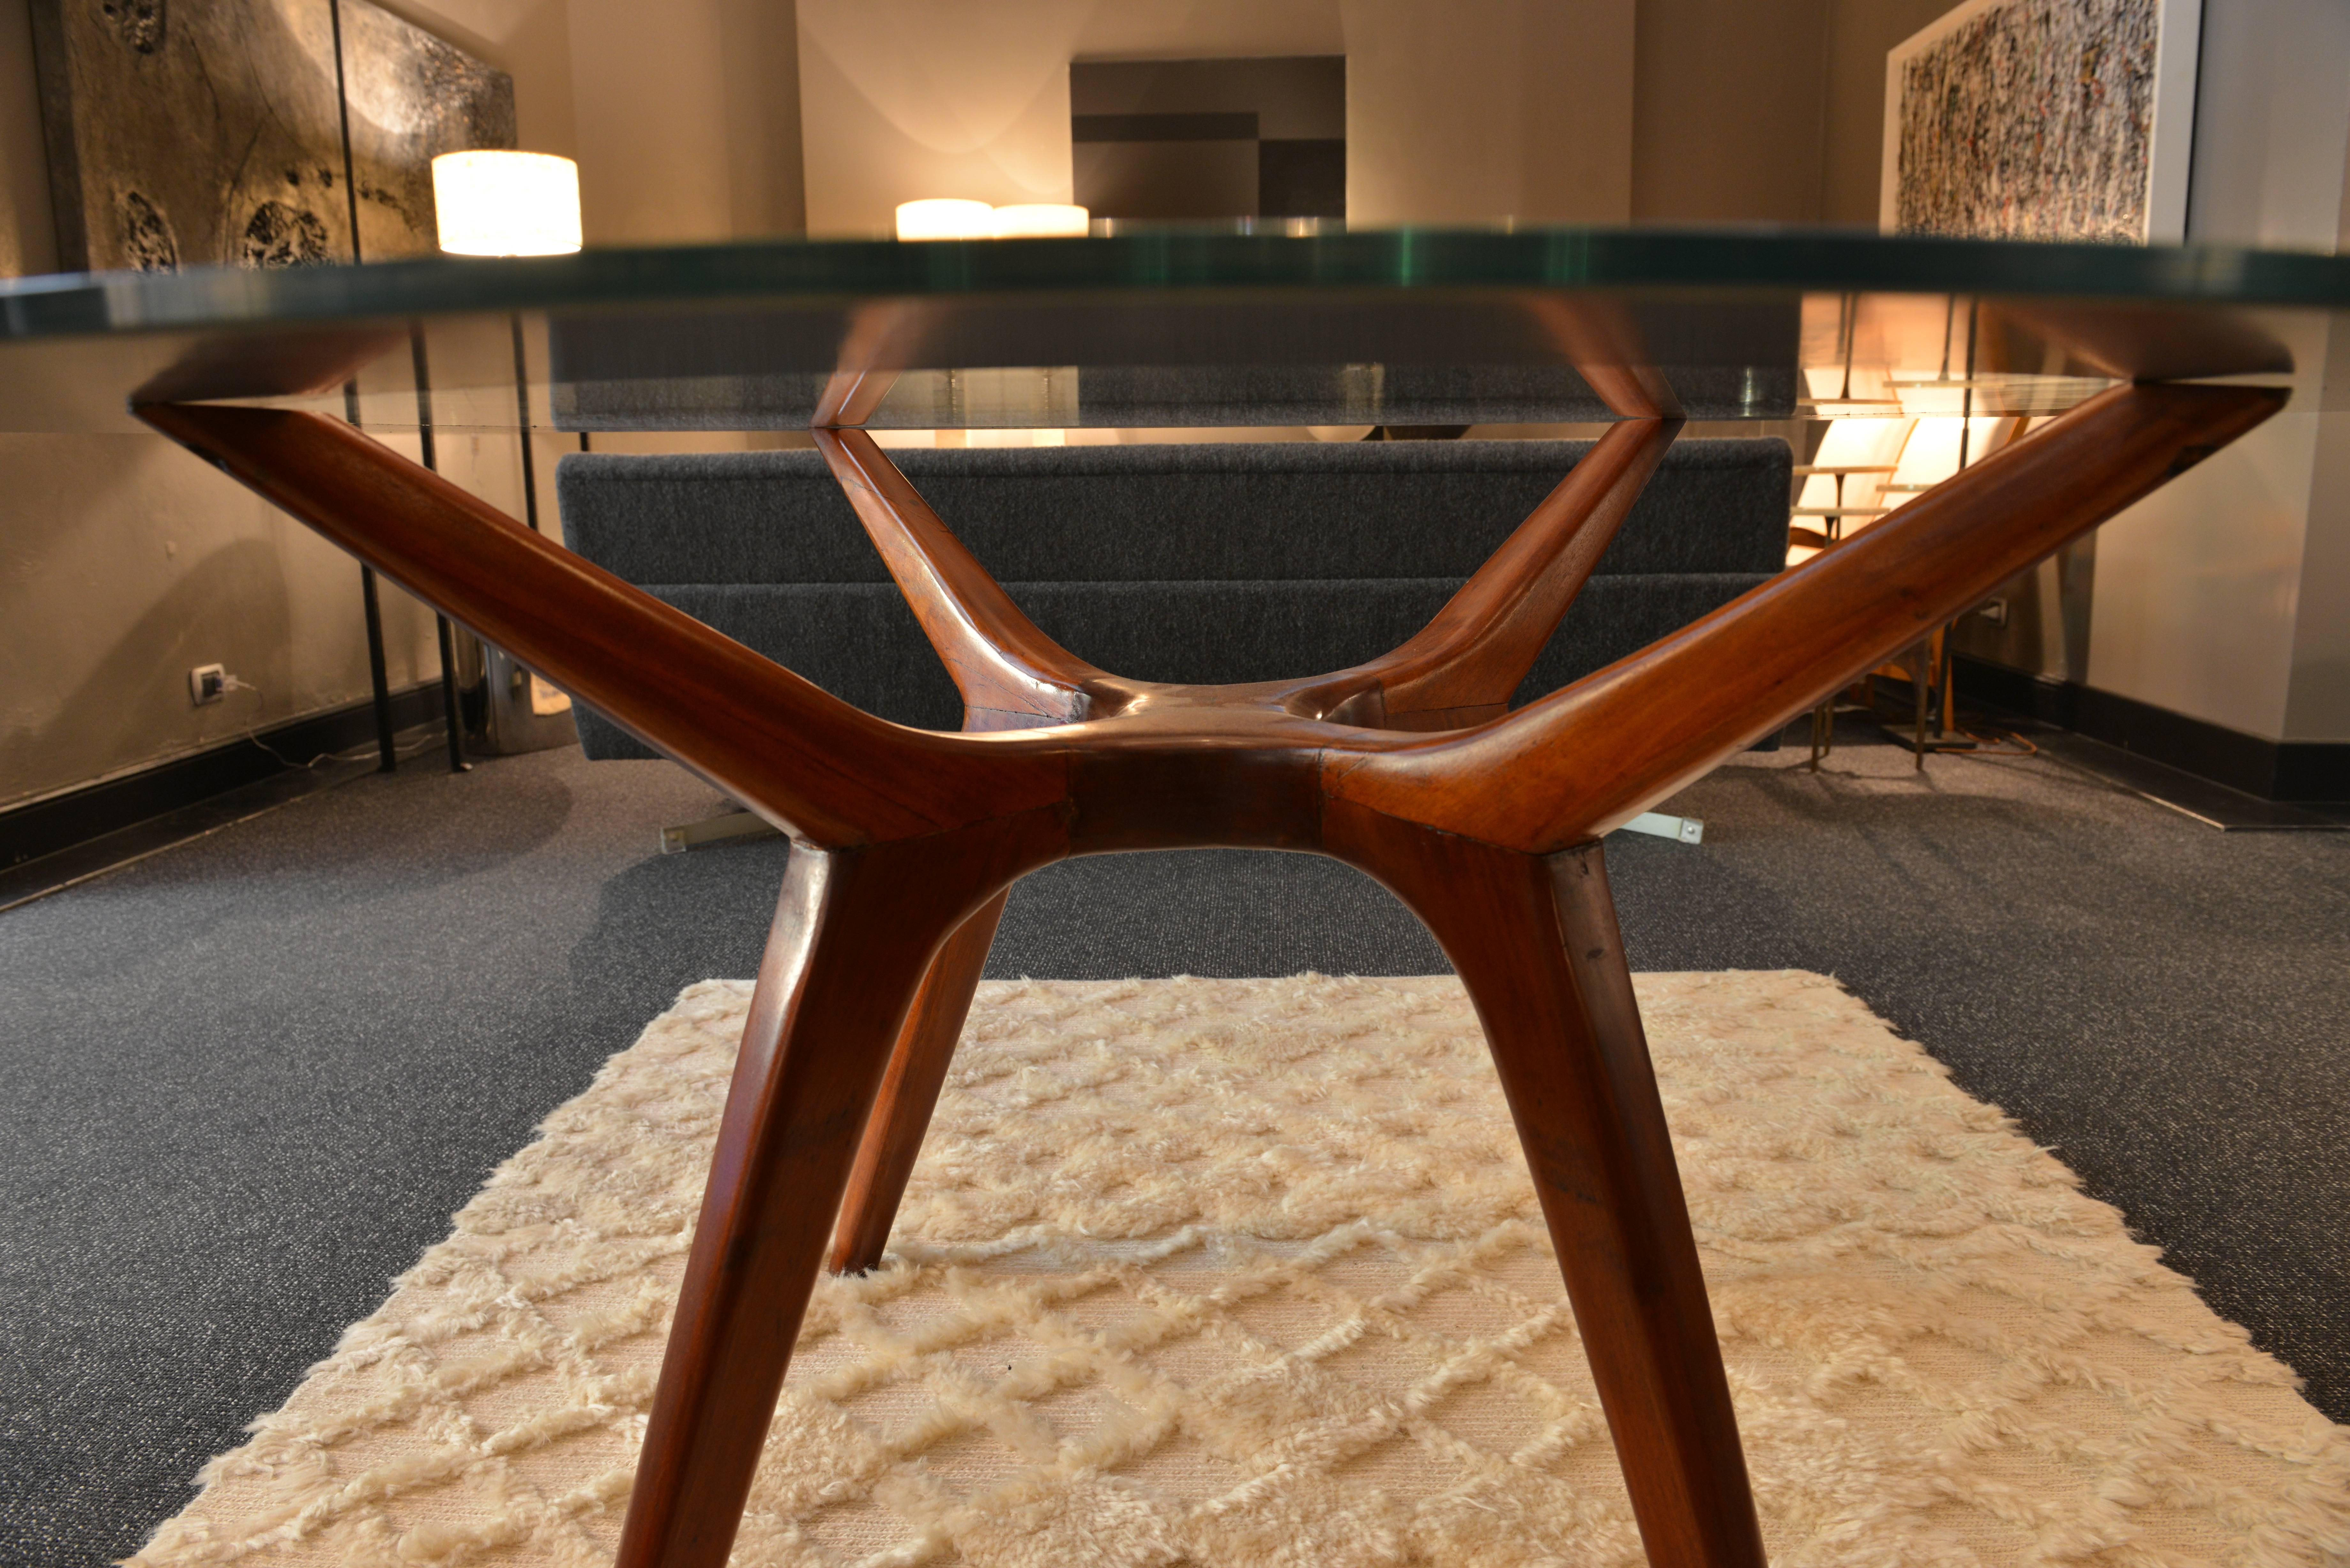 Round table realized in the United States in the early 1950s. The base is of massive natural colour walnut wood, while the clear glass top has a mirrored frame, that allows to see the details of the wooden structure.